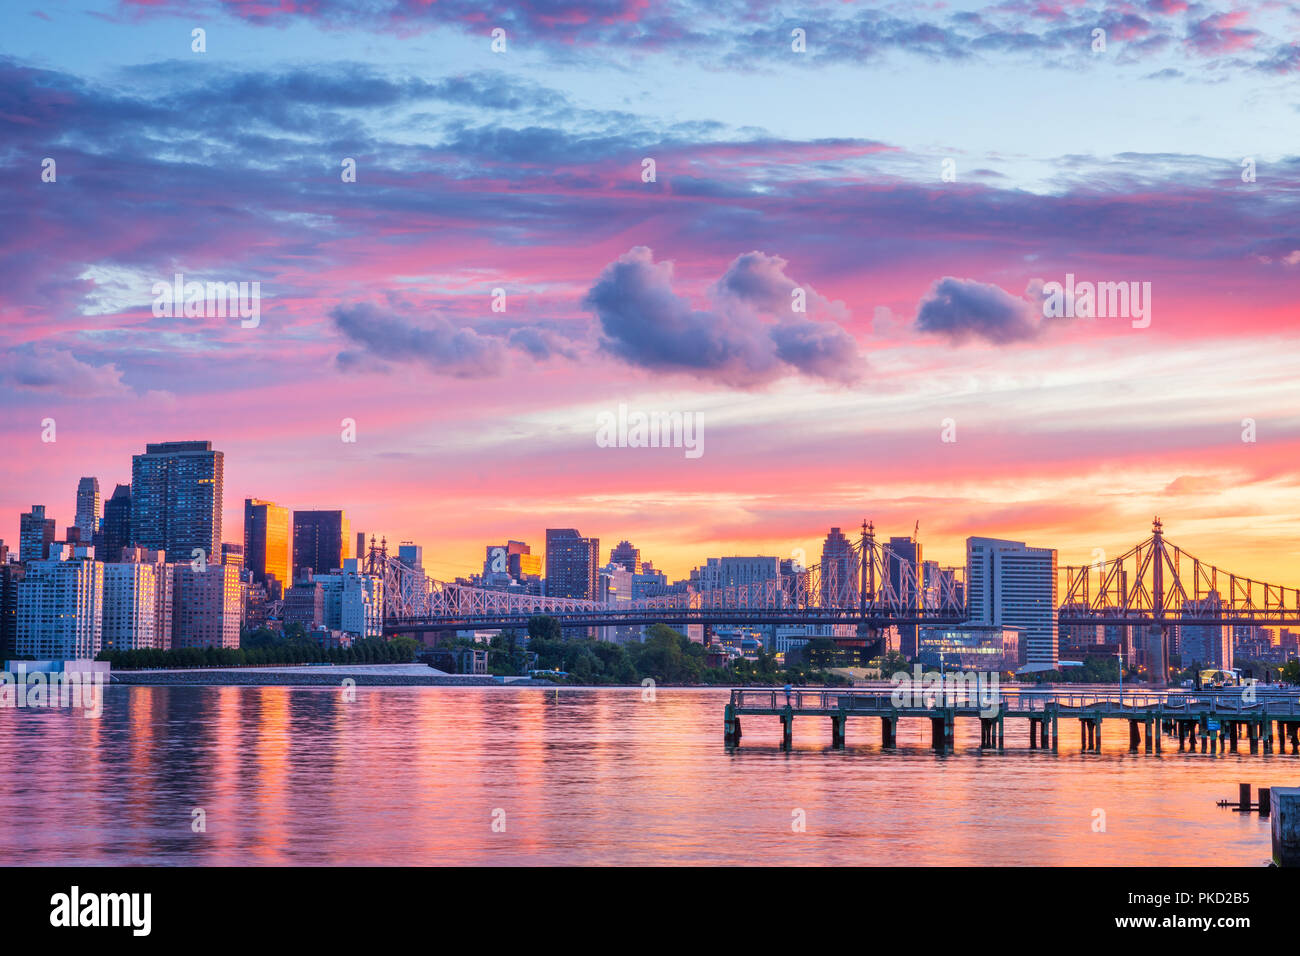 View to Manhattan skyline from the Long Island City at sunrise, this  area along the East River in Queens is known of its great views to Manhattan. Stock Photo